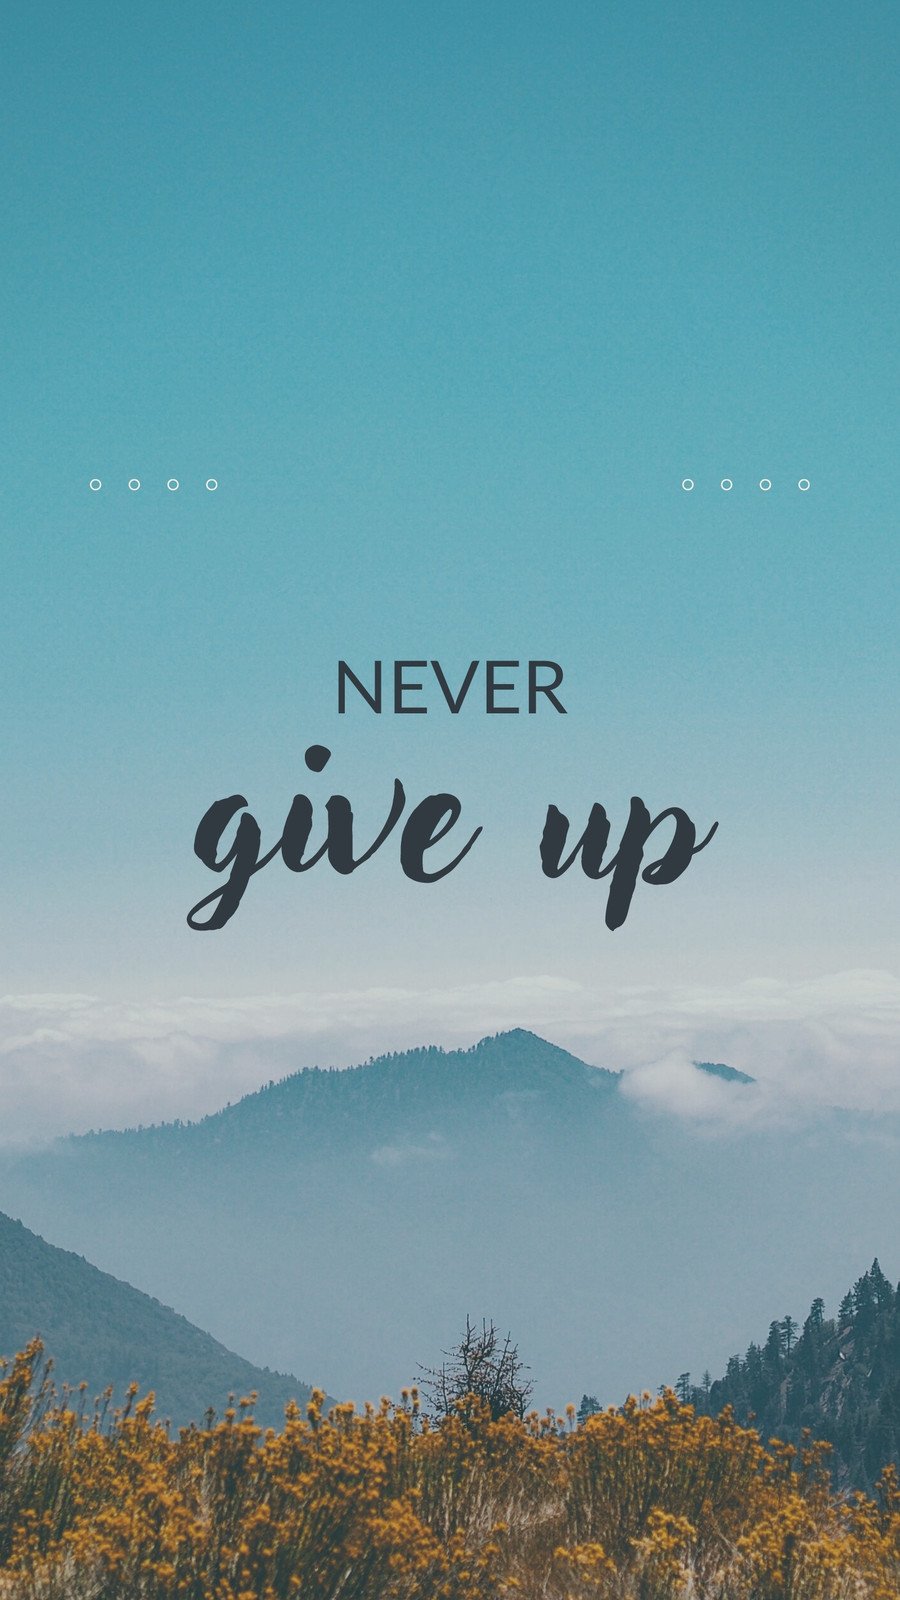 Never Give Up iPhone Wallpaper  iPhone Wallpapers  iPhone Wallpapers